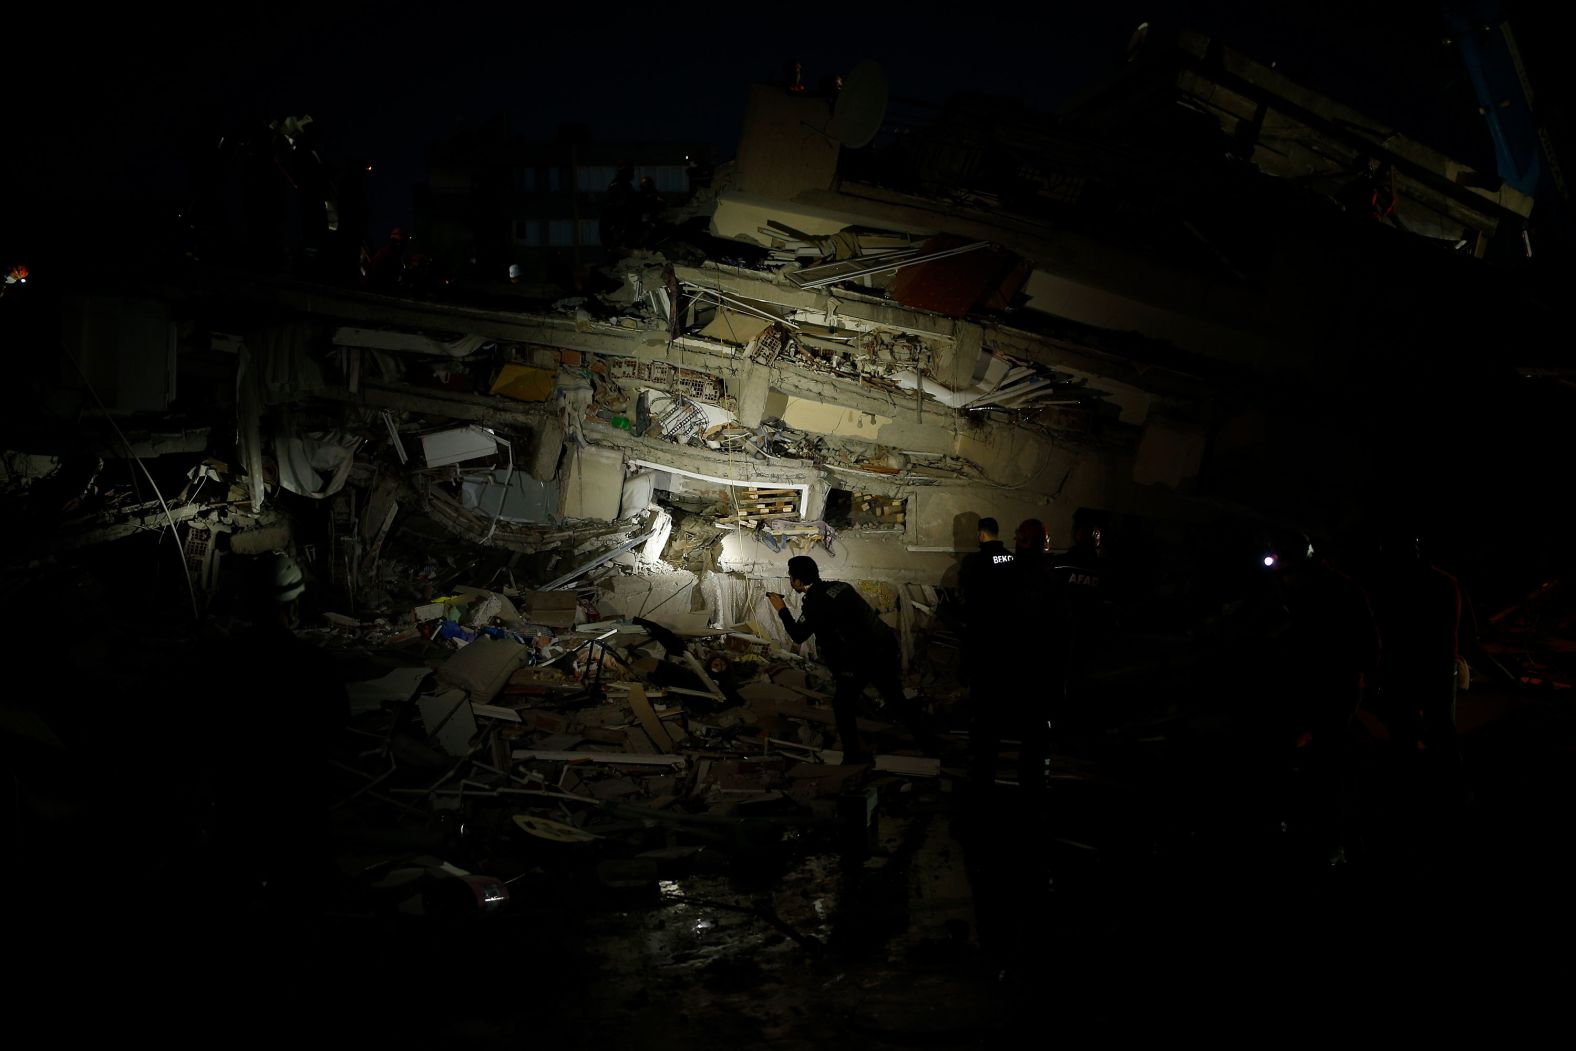 Rescue workers search for survivors in the debris of a collapsed building in Izmir.